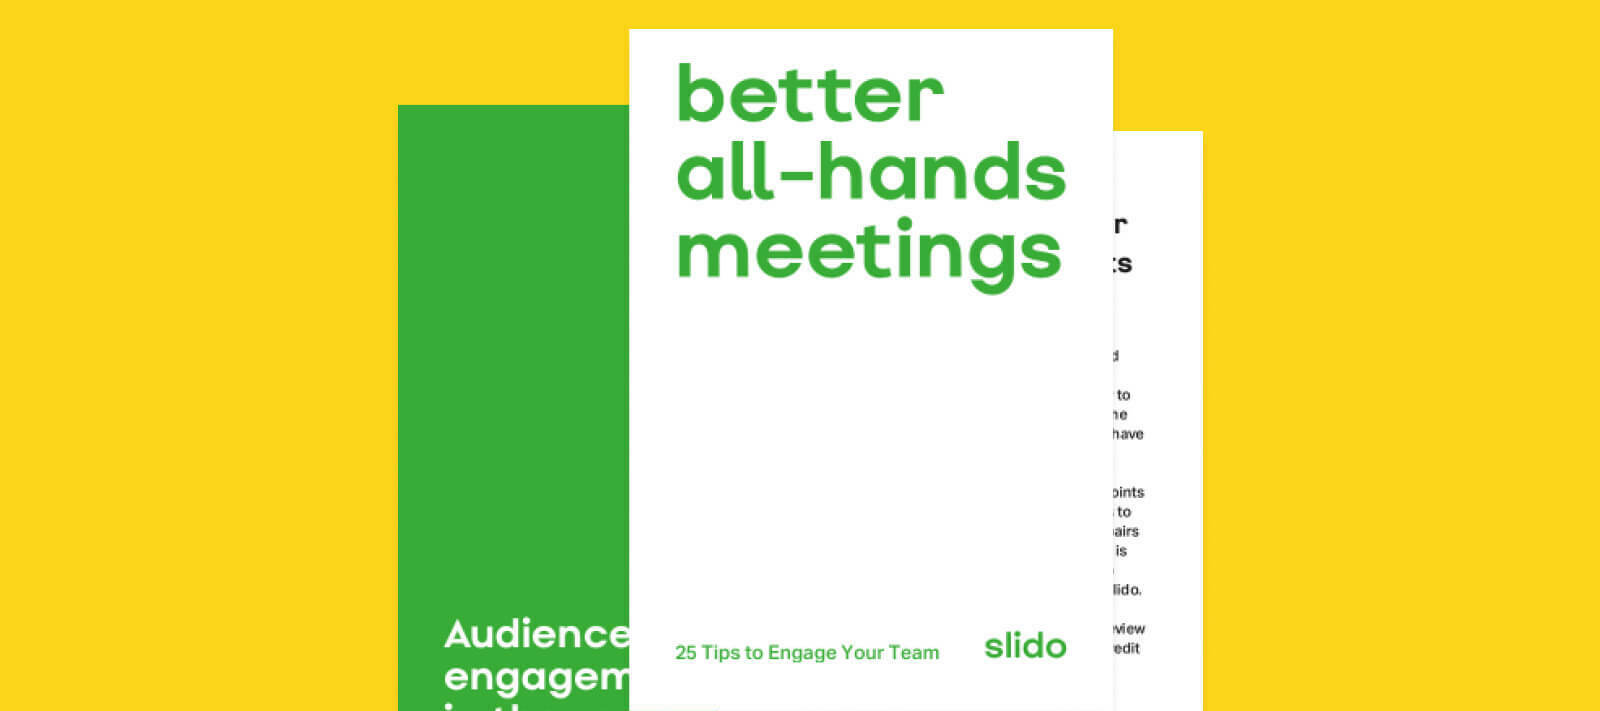 Guide: 25 tips to engage your team at all-hands meetings